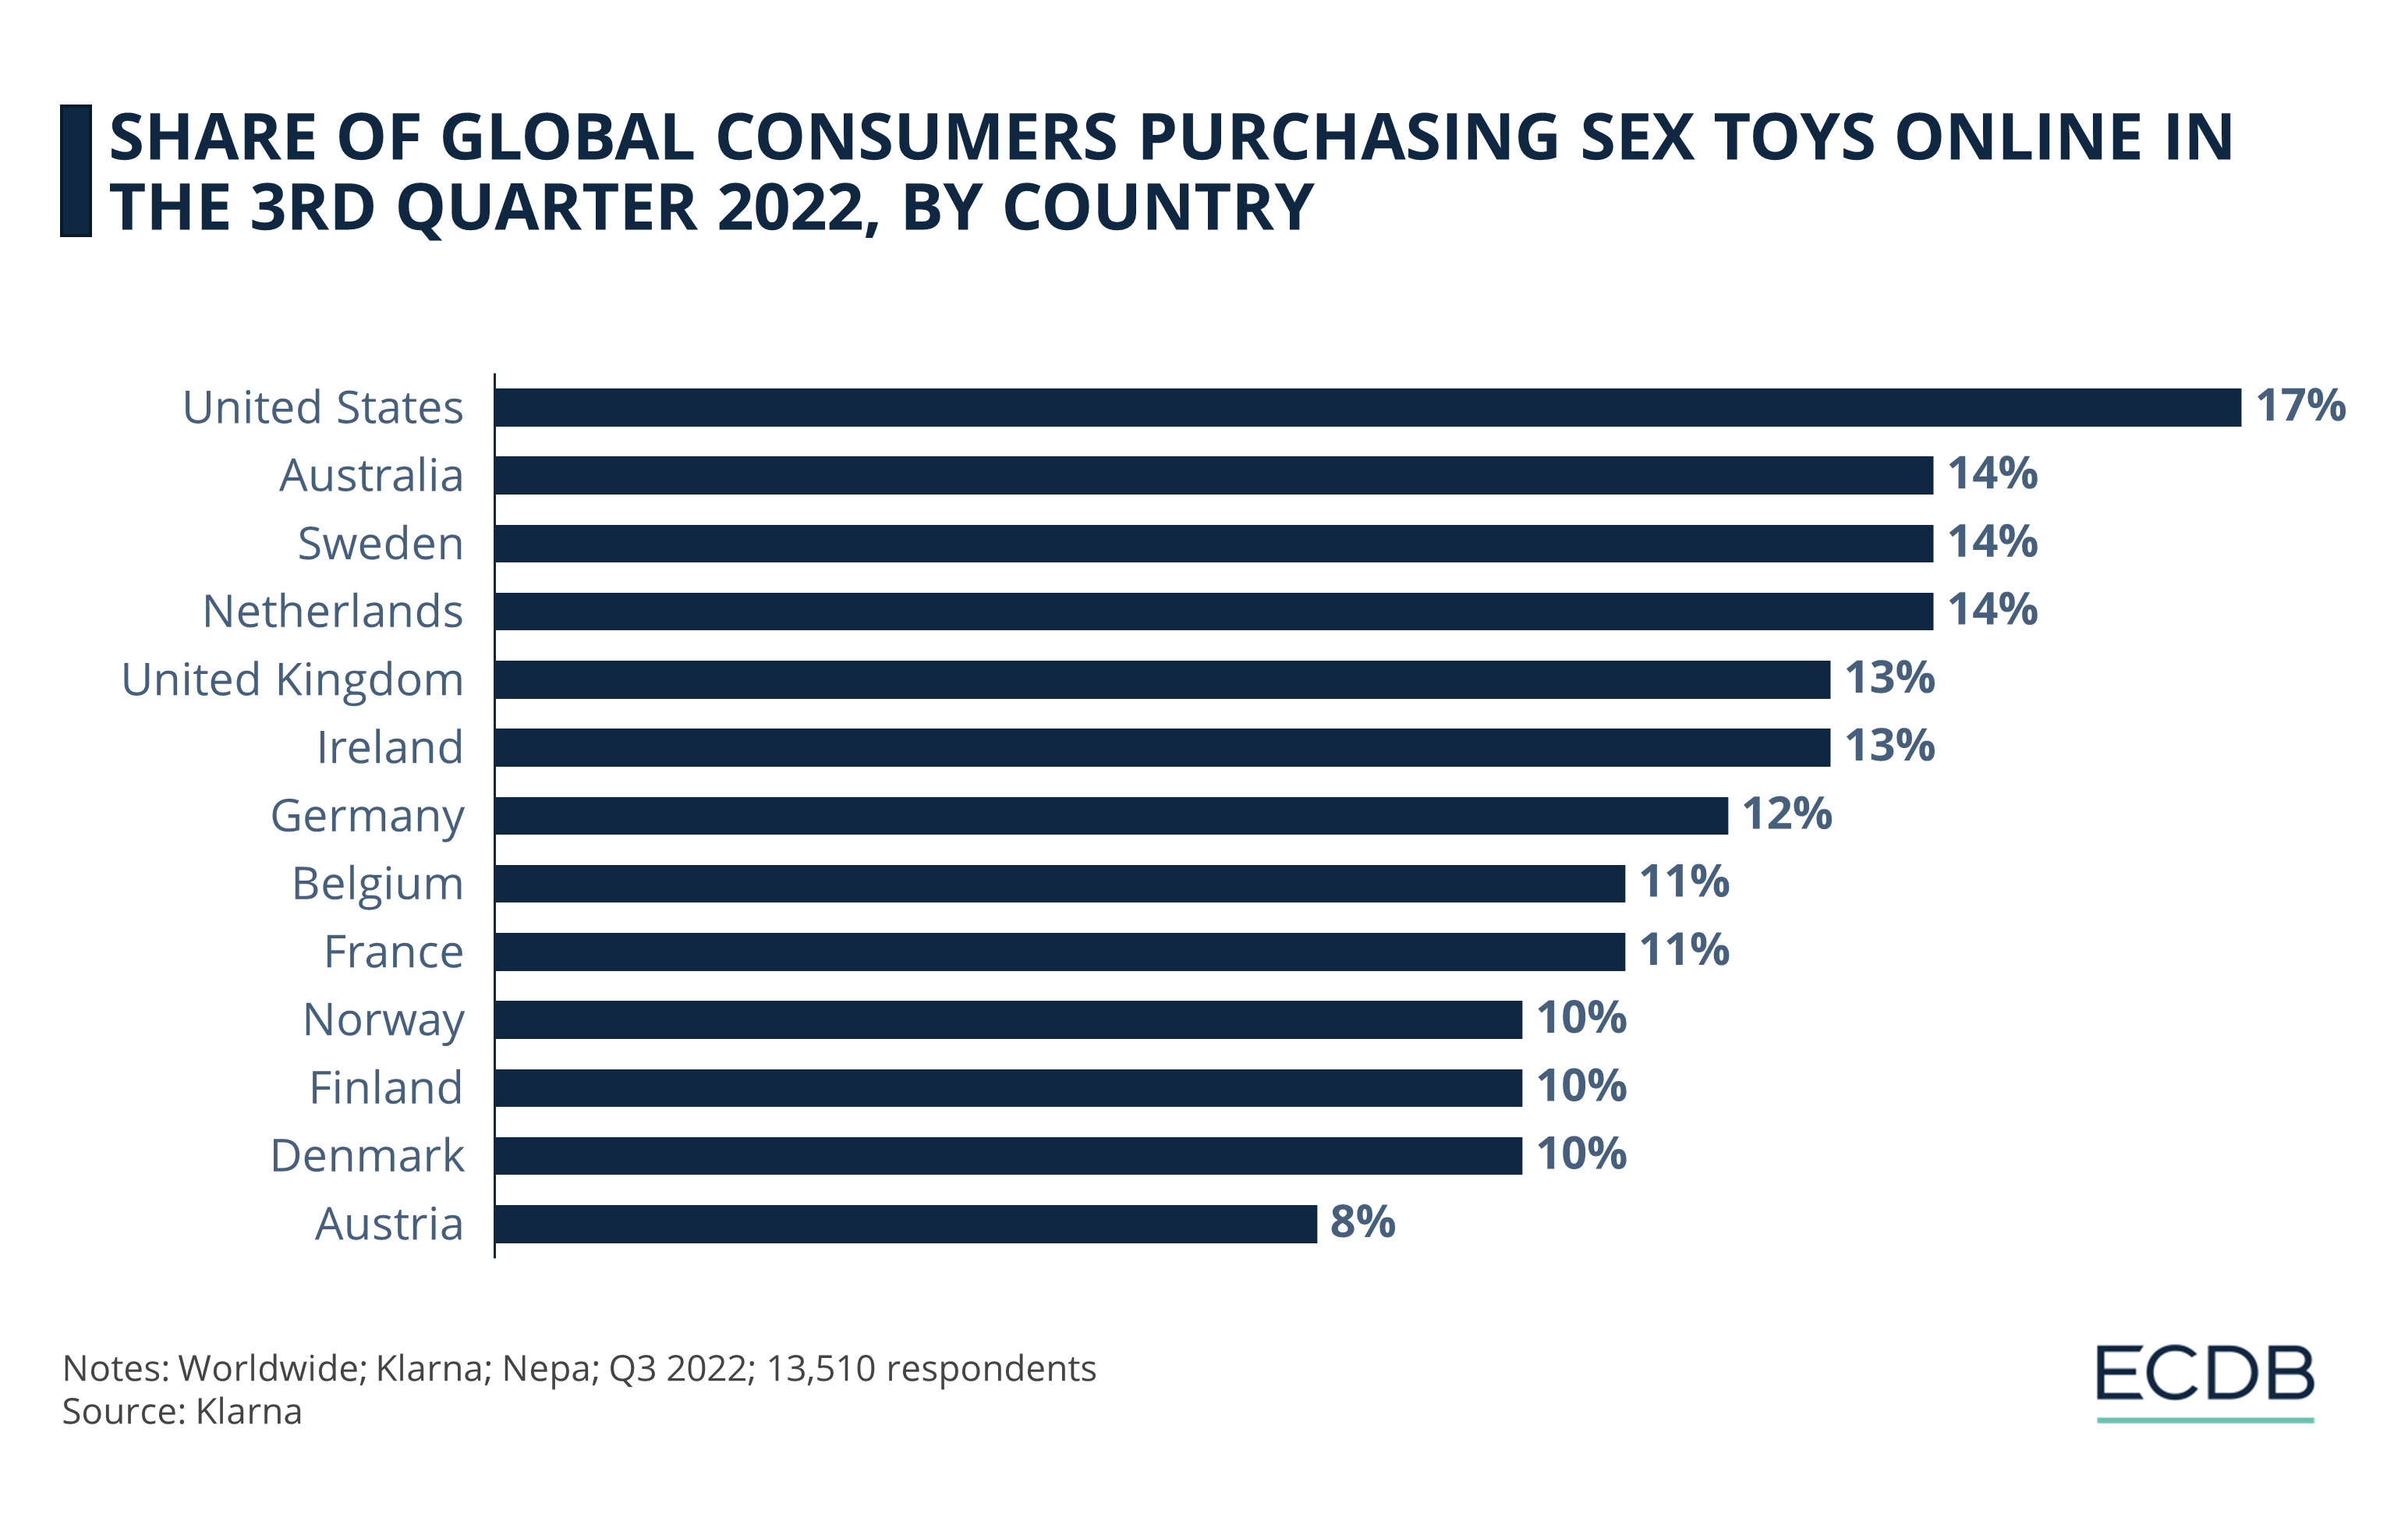 Share of Global Consumers Purchasing Sex Toys Online in the 3rd Quarter 2022, by Country